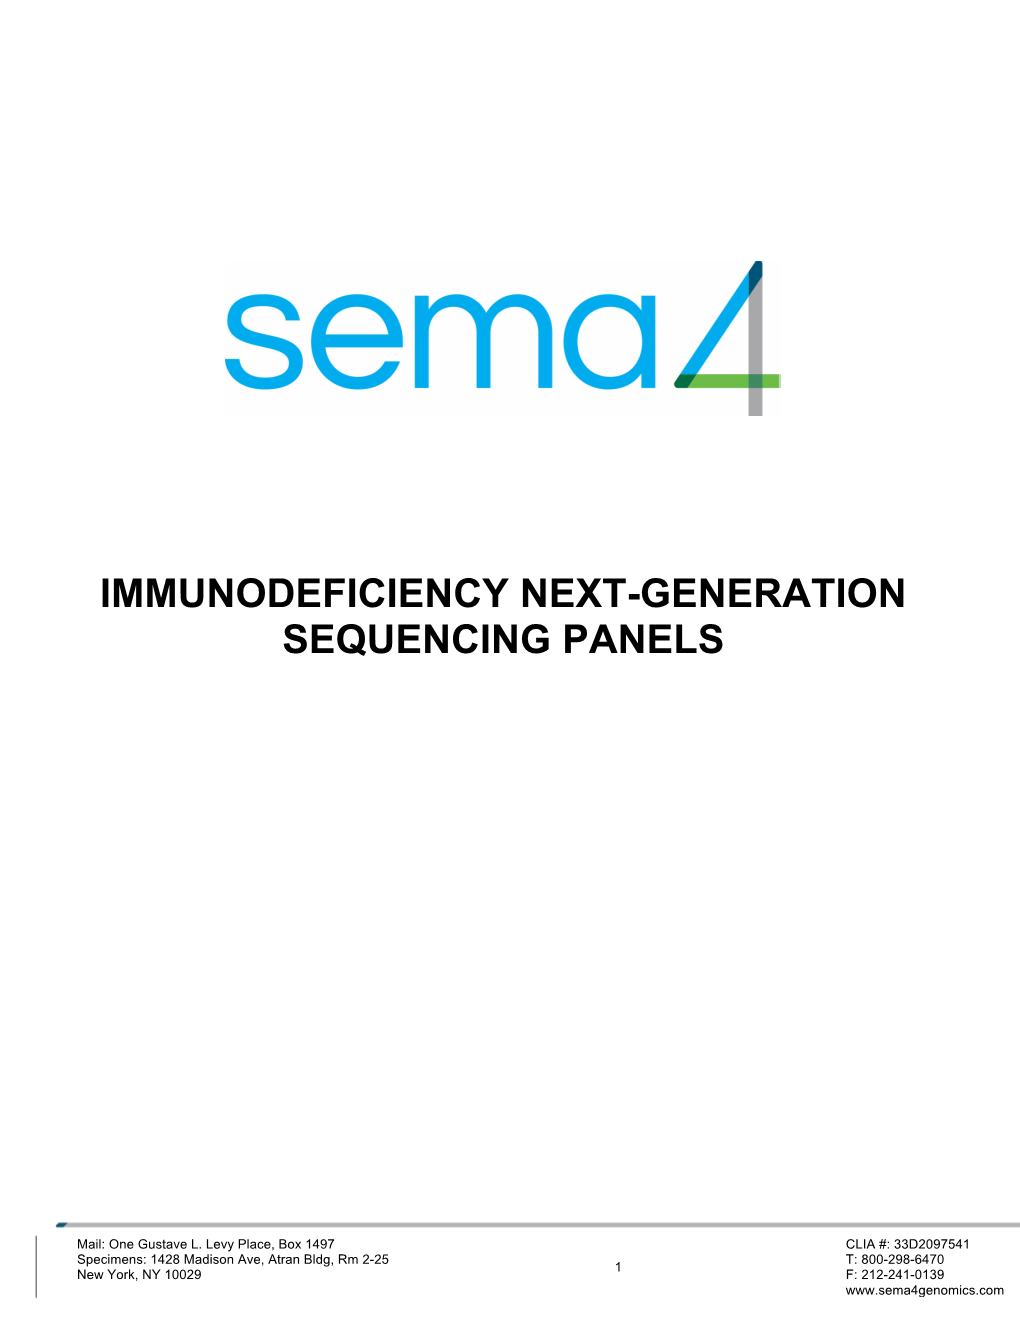 Immunodeficiency Next-Generation Sequencing Panels